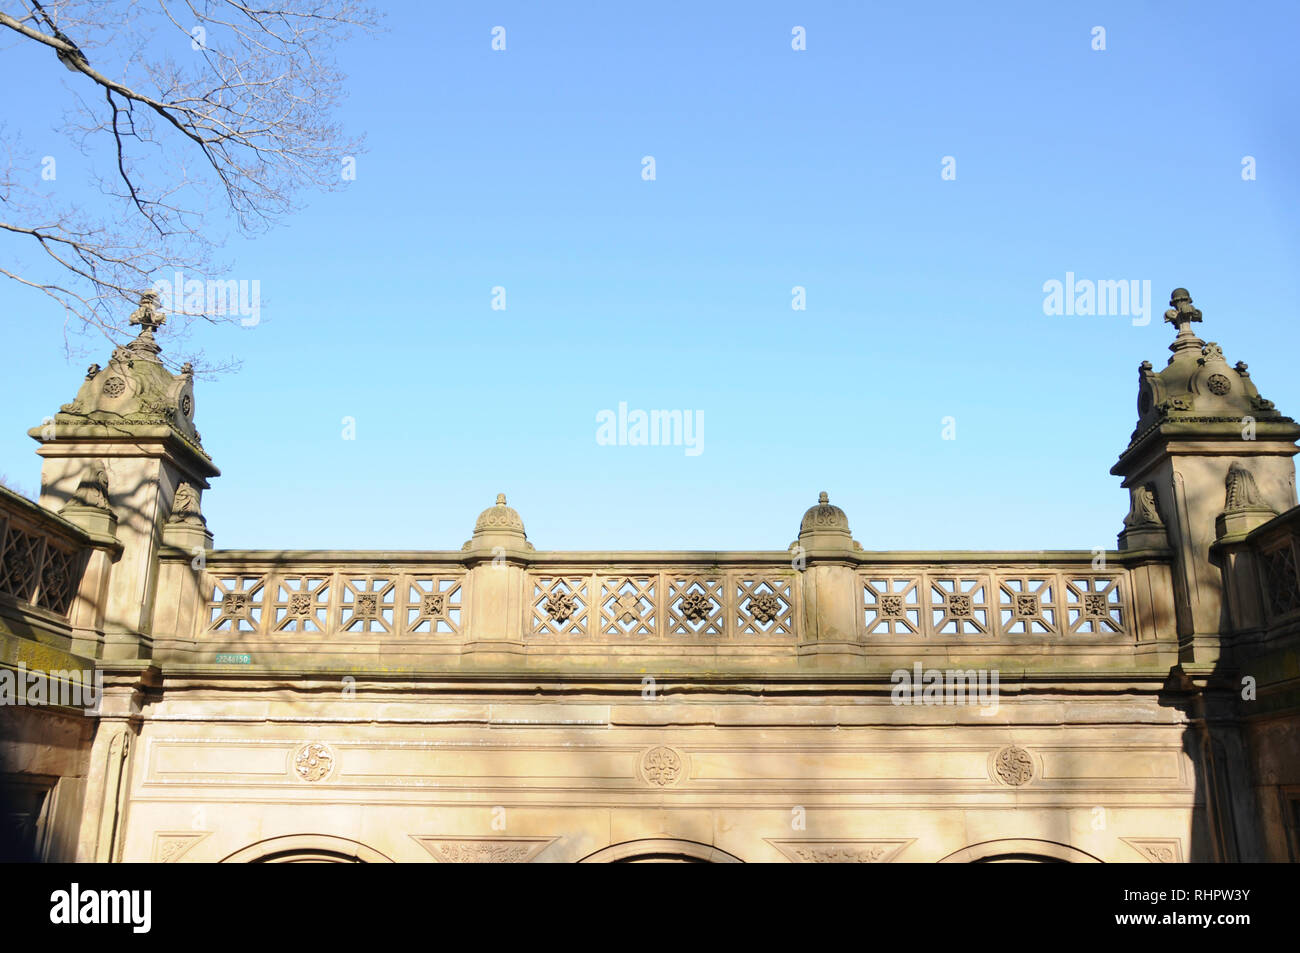 A portion of the stylish art deco and beaux art balcony architecture of the Bethesda fountain garden in New York City's iconic Central Park. Stock Photo